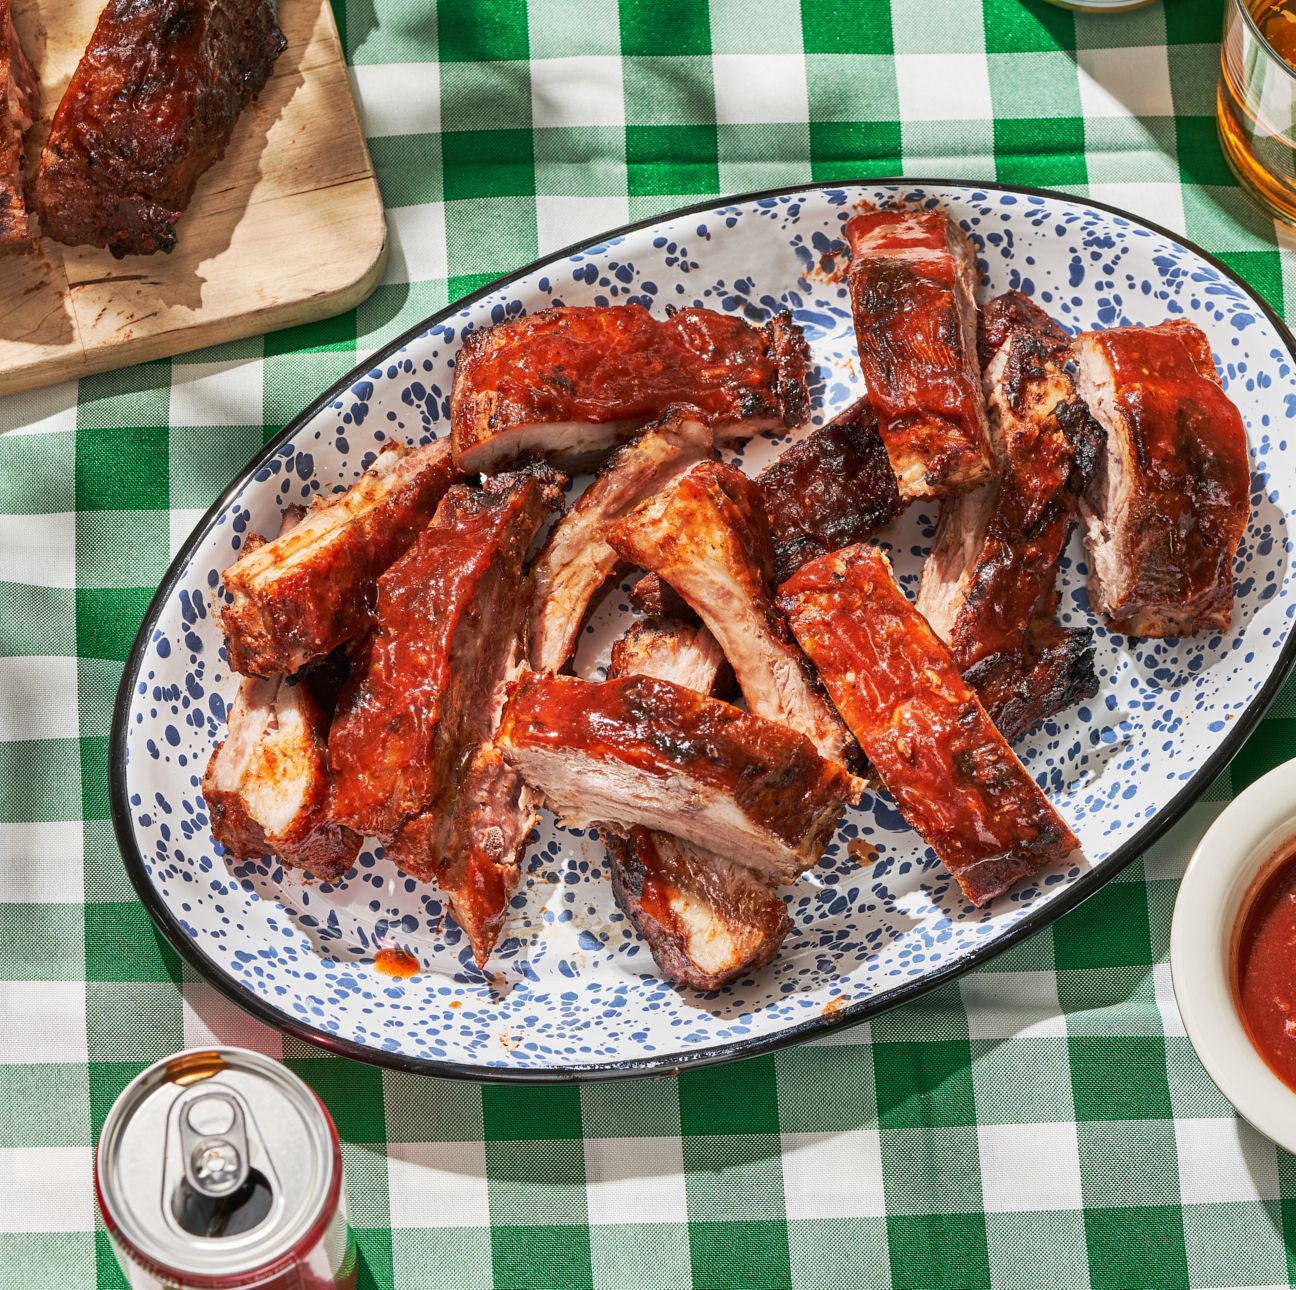 You Don't Need A Smoker To Make Spot-On Copycat Chili's Baby Back Ribs